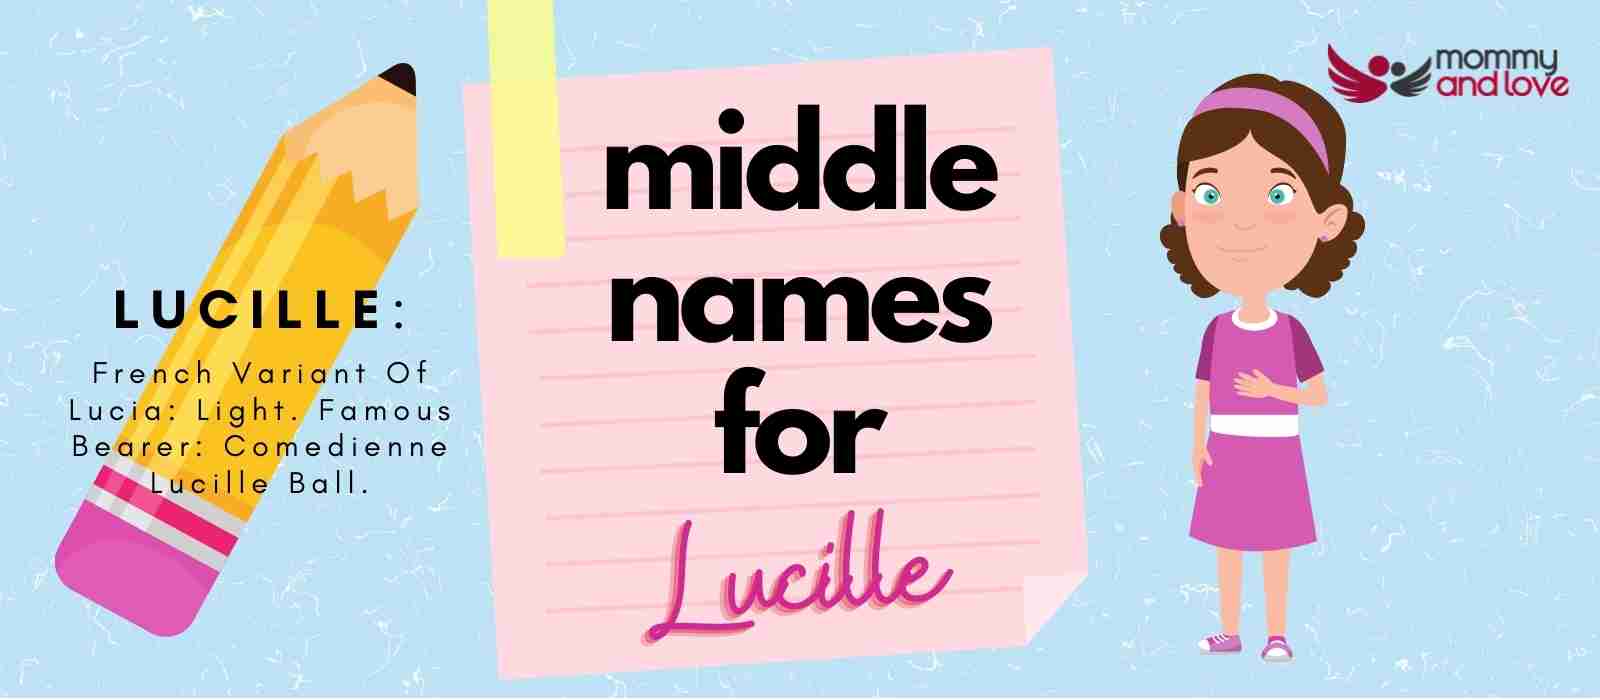 Middle Names for Lucille